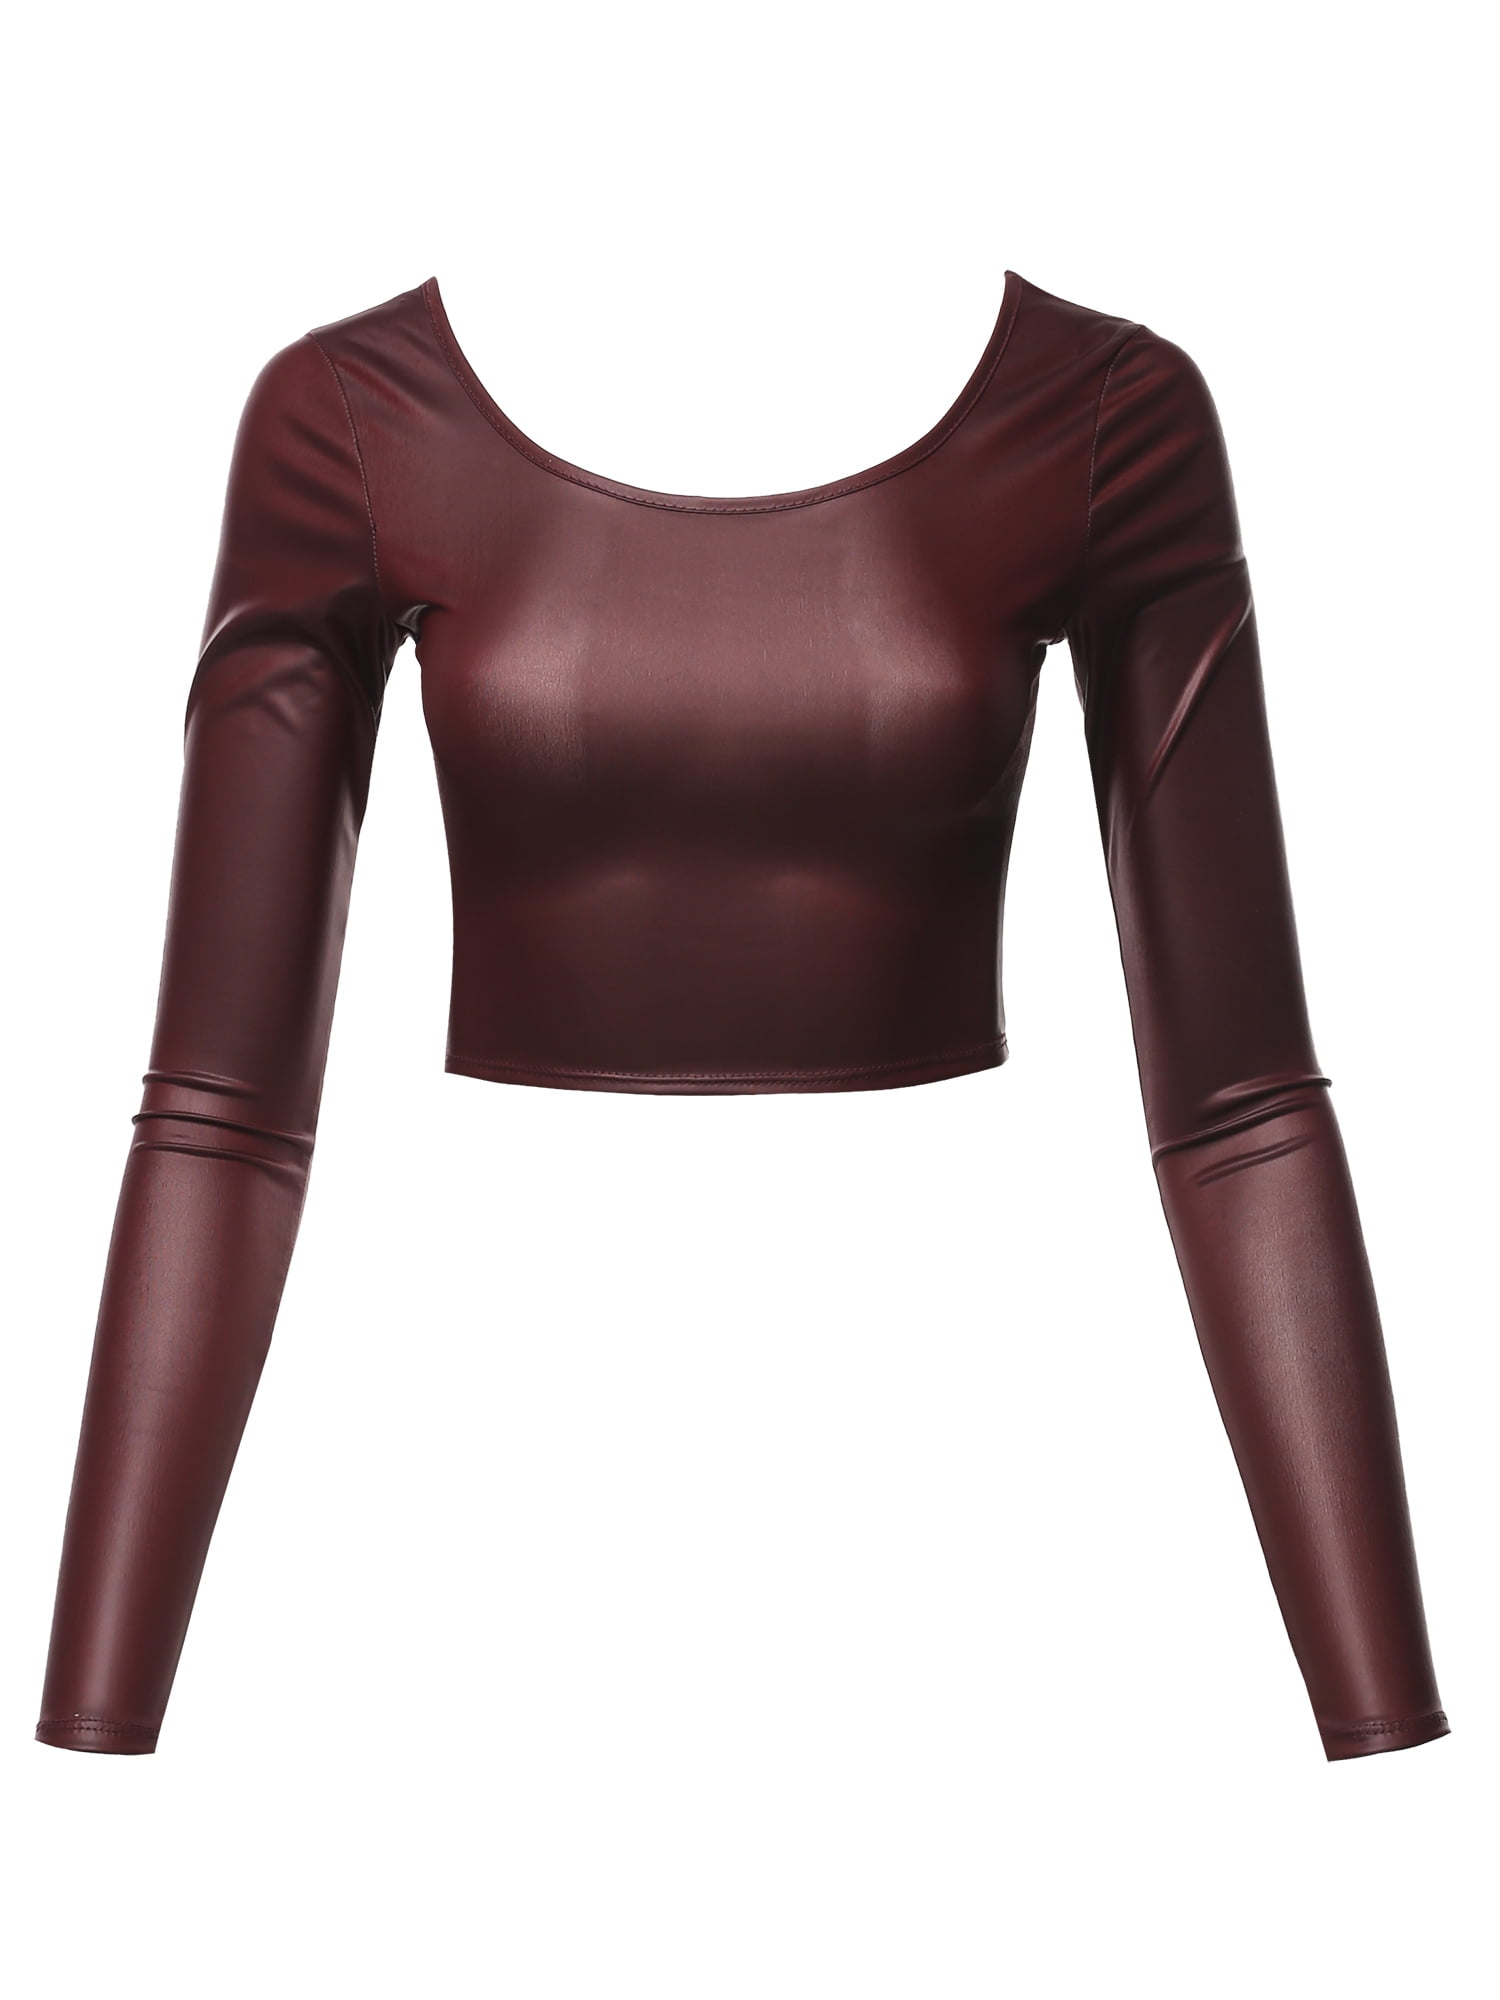 A2Y Women's Faux Leather Double Scoop Neck Long Sleeve Crop Top Burgundy M